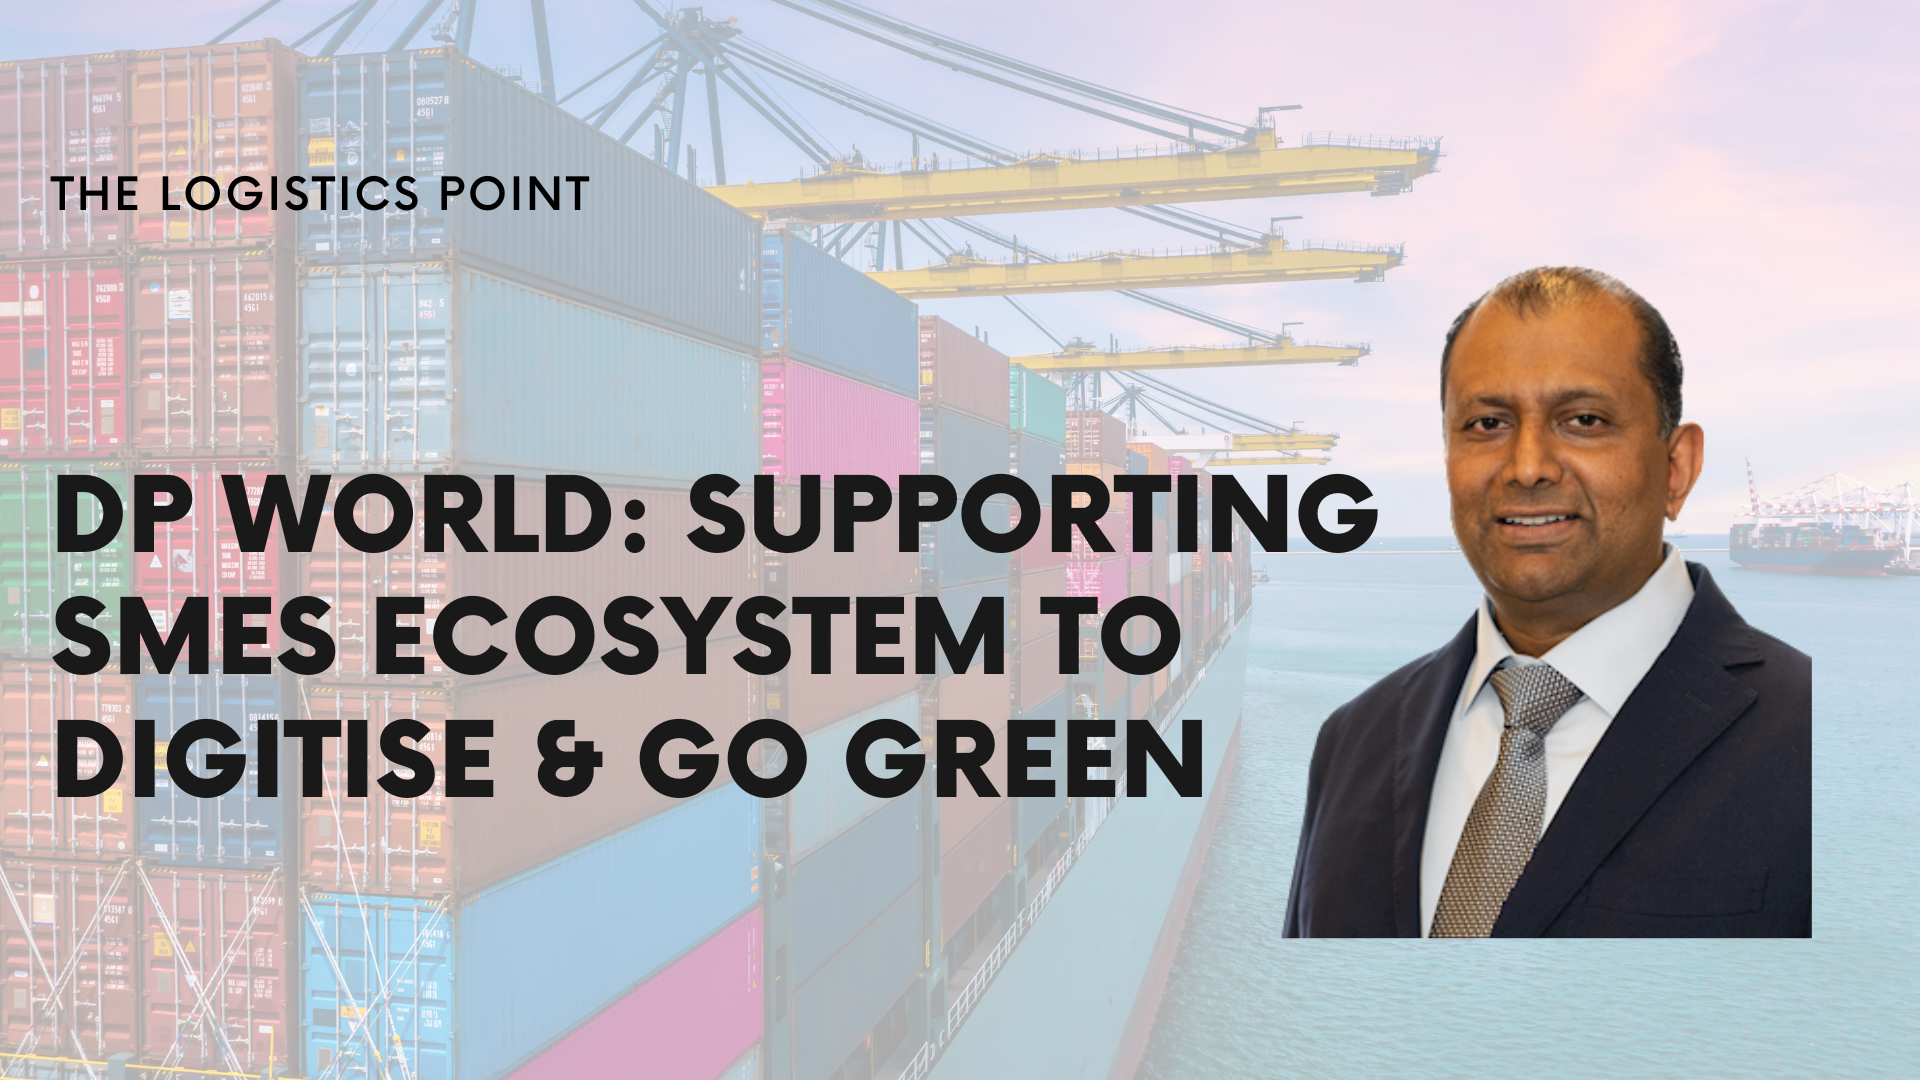 VIDEO DP World: Supporting SMEs Ecosystem To Digitise & Go Green